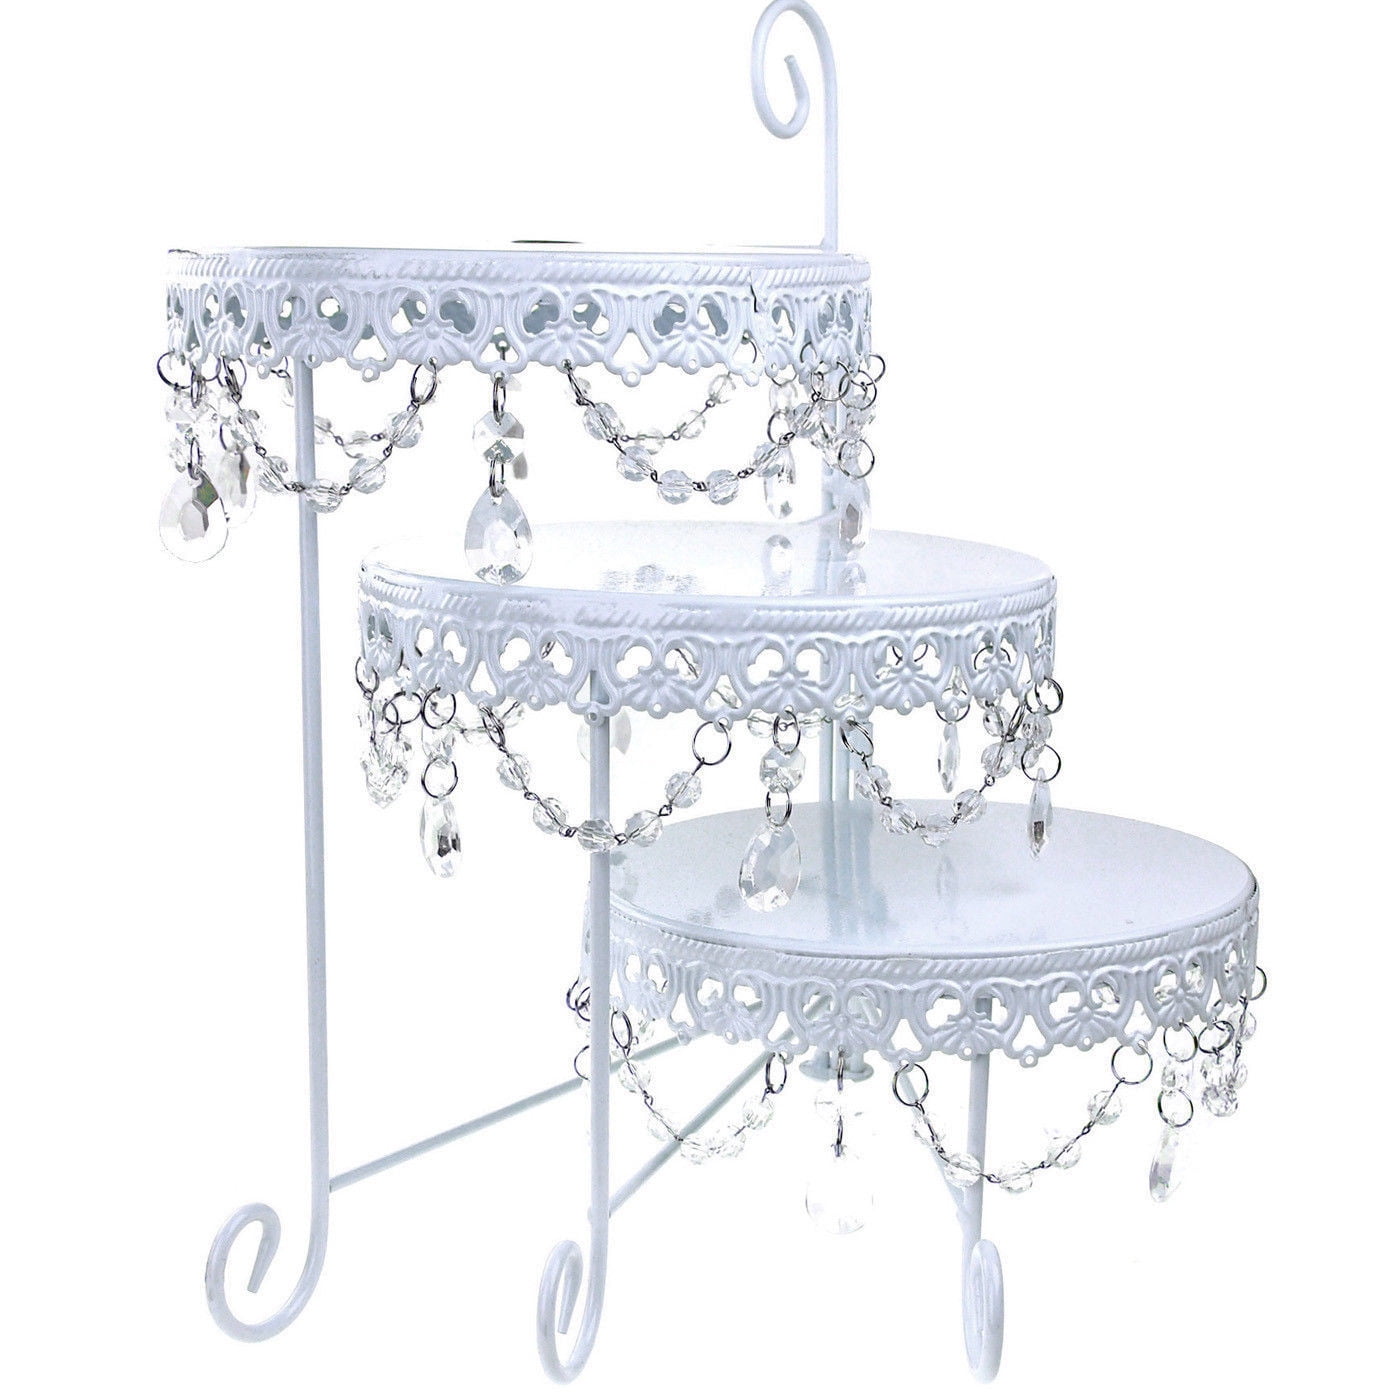 White Three Layer Round Metal Cake Stand with Hanging Crystals 15-Inch